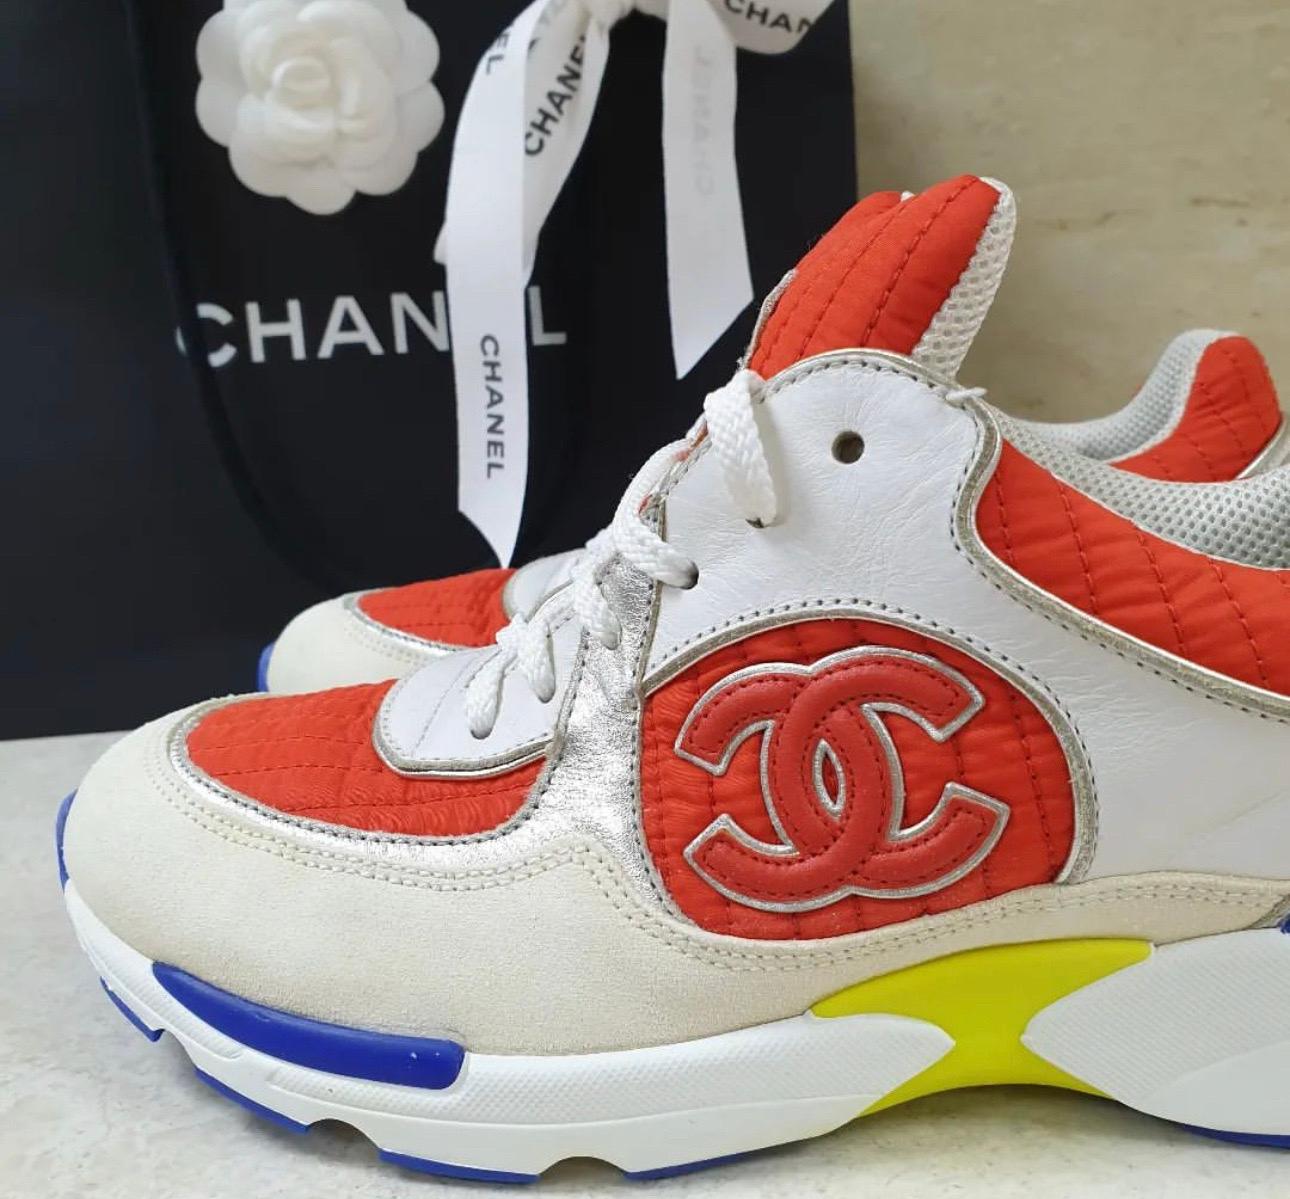 These sneakers from Chanel are perfect for a casual day out. 
They are crafted from nylon and leather and feature round toes, lace-ups on the vamps, CC logo detailing on the sides and leather-lined insoles. 
The tough rubber soles ensure you walk in